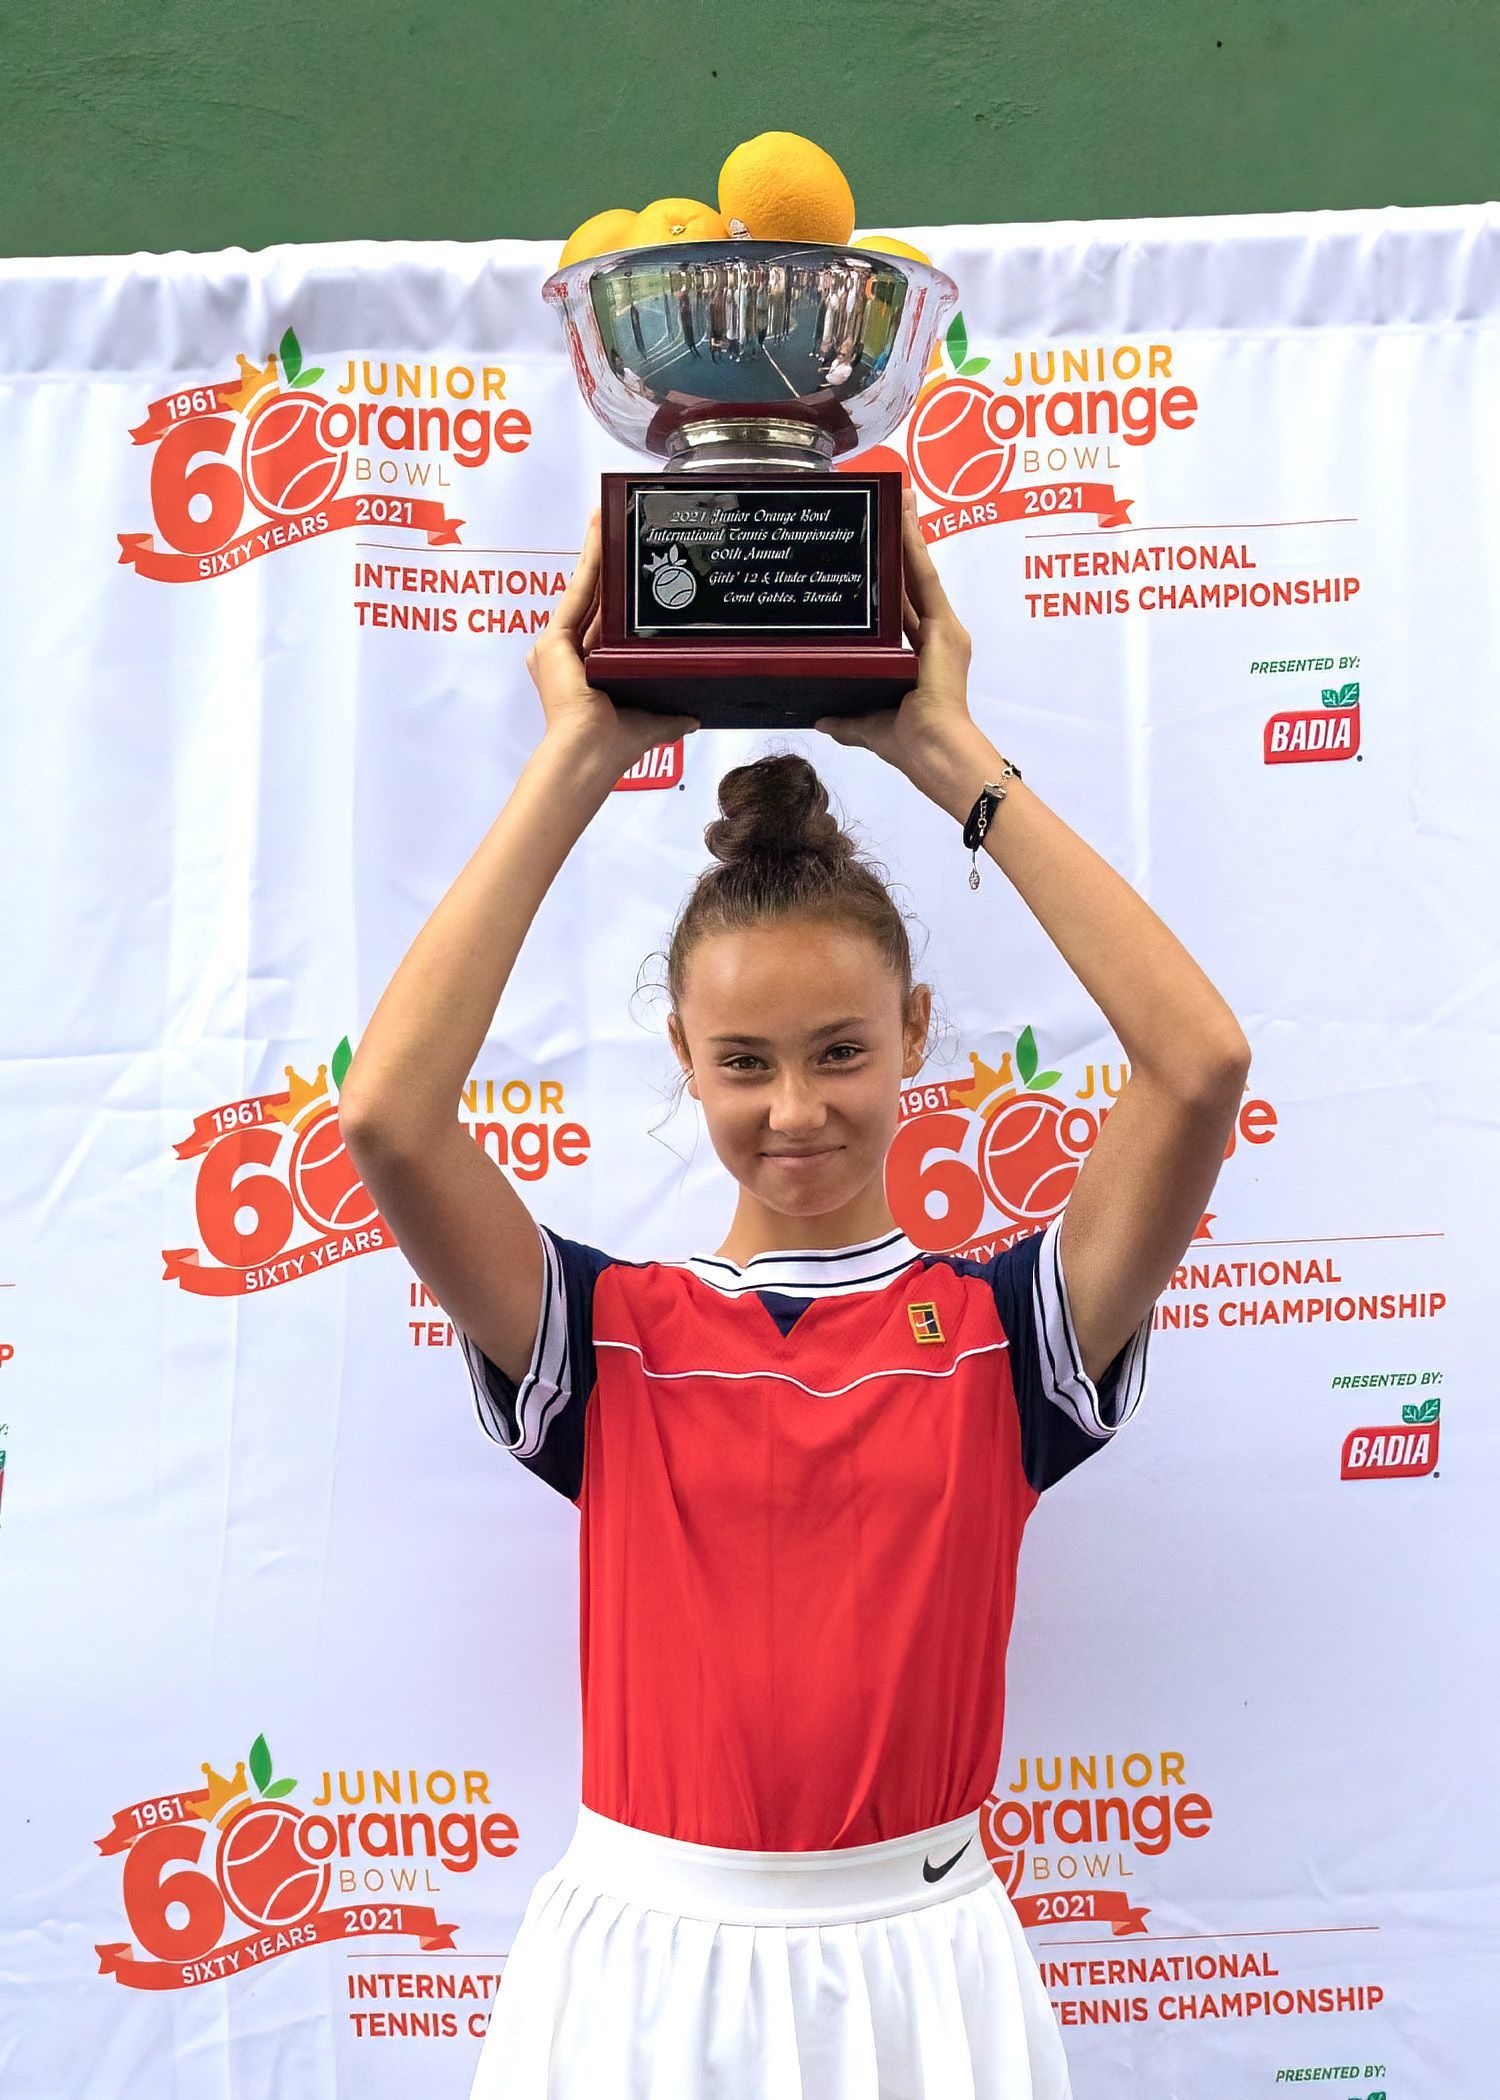 Lia Belibova wins Girls' 12s final over Russian Christina Lyutova in a 6-3, 6-1 victory to become the first champion from Moldova